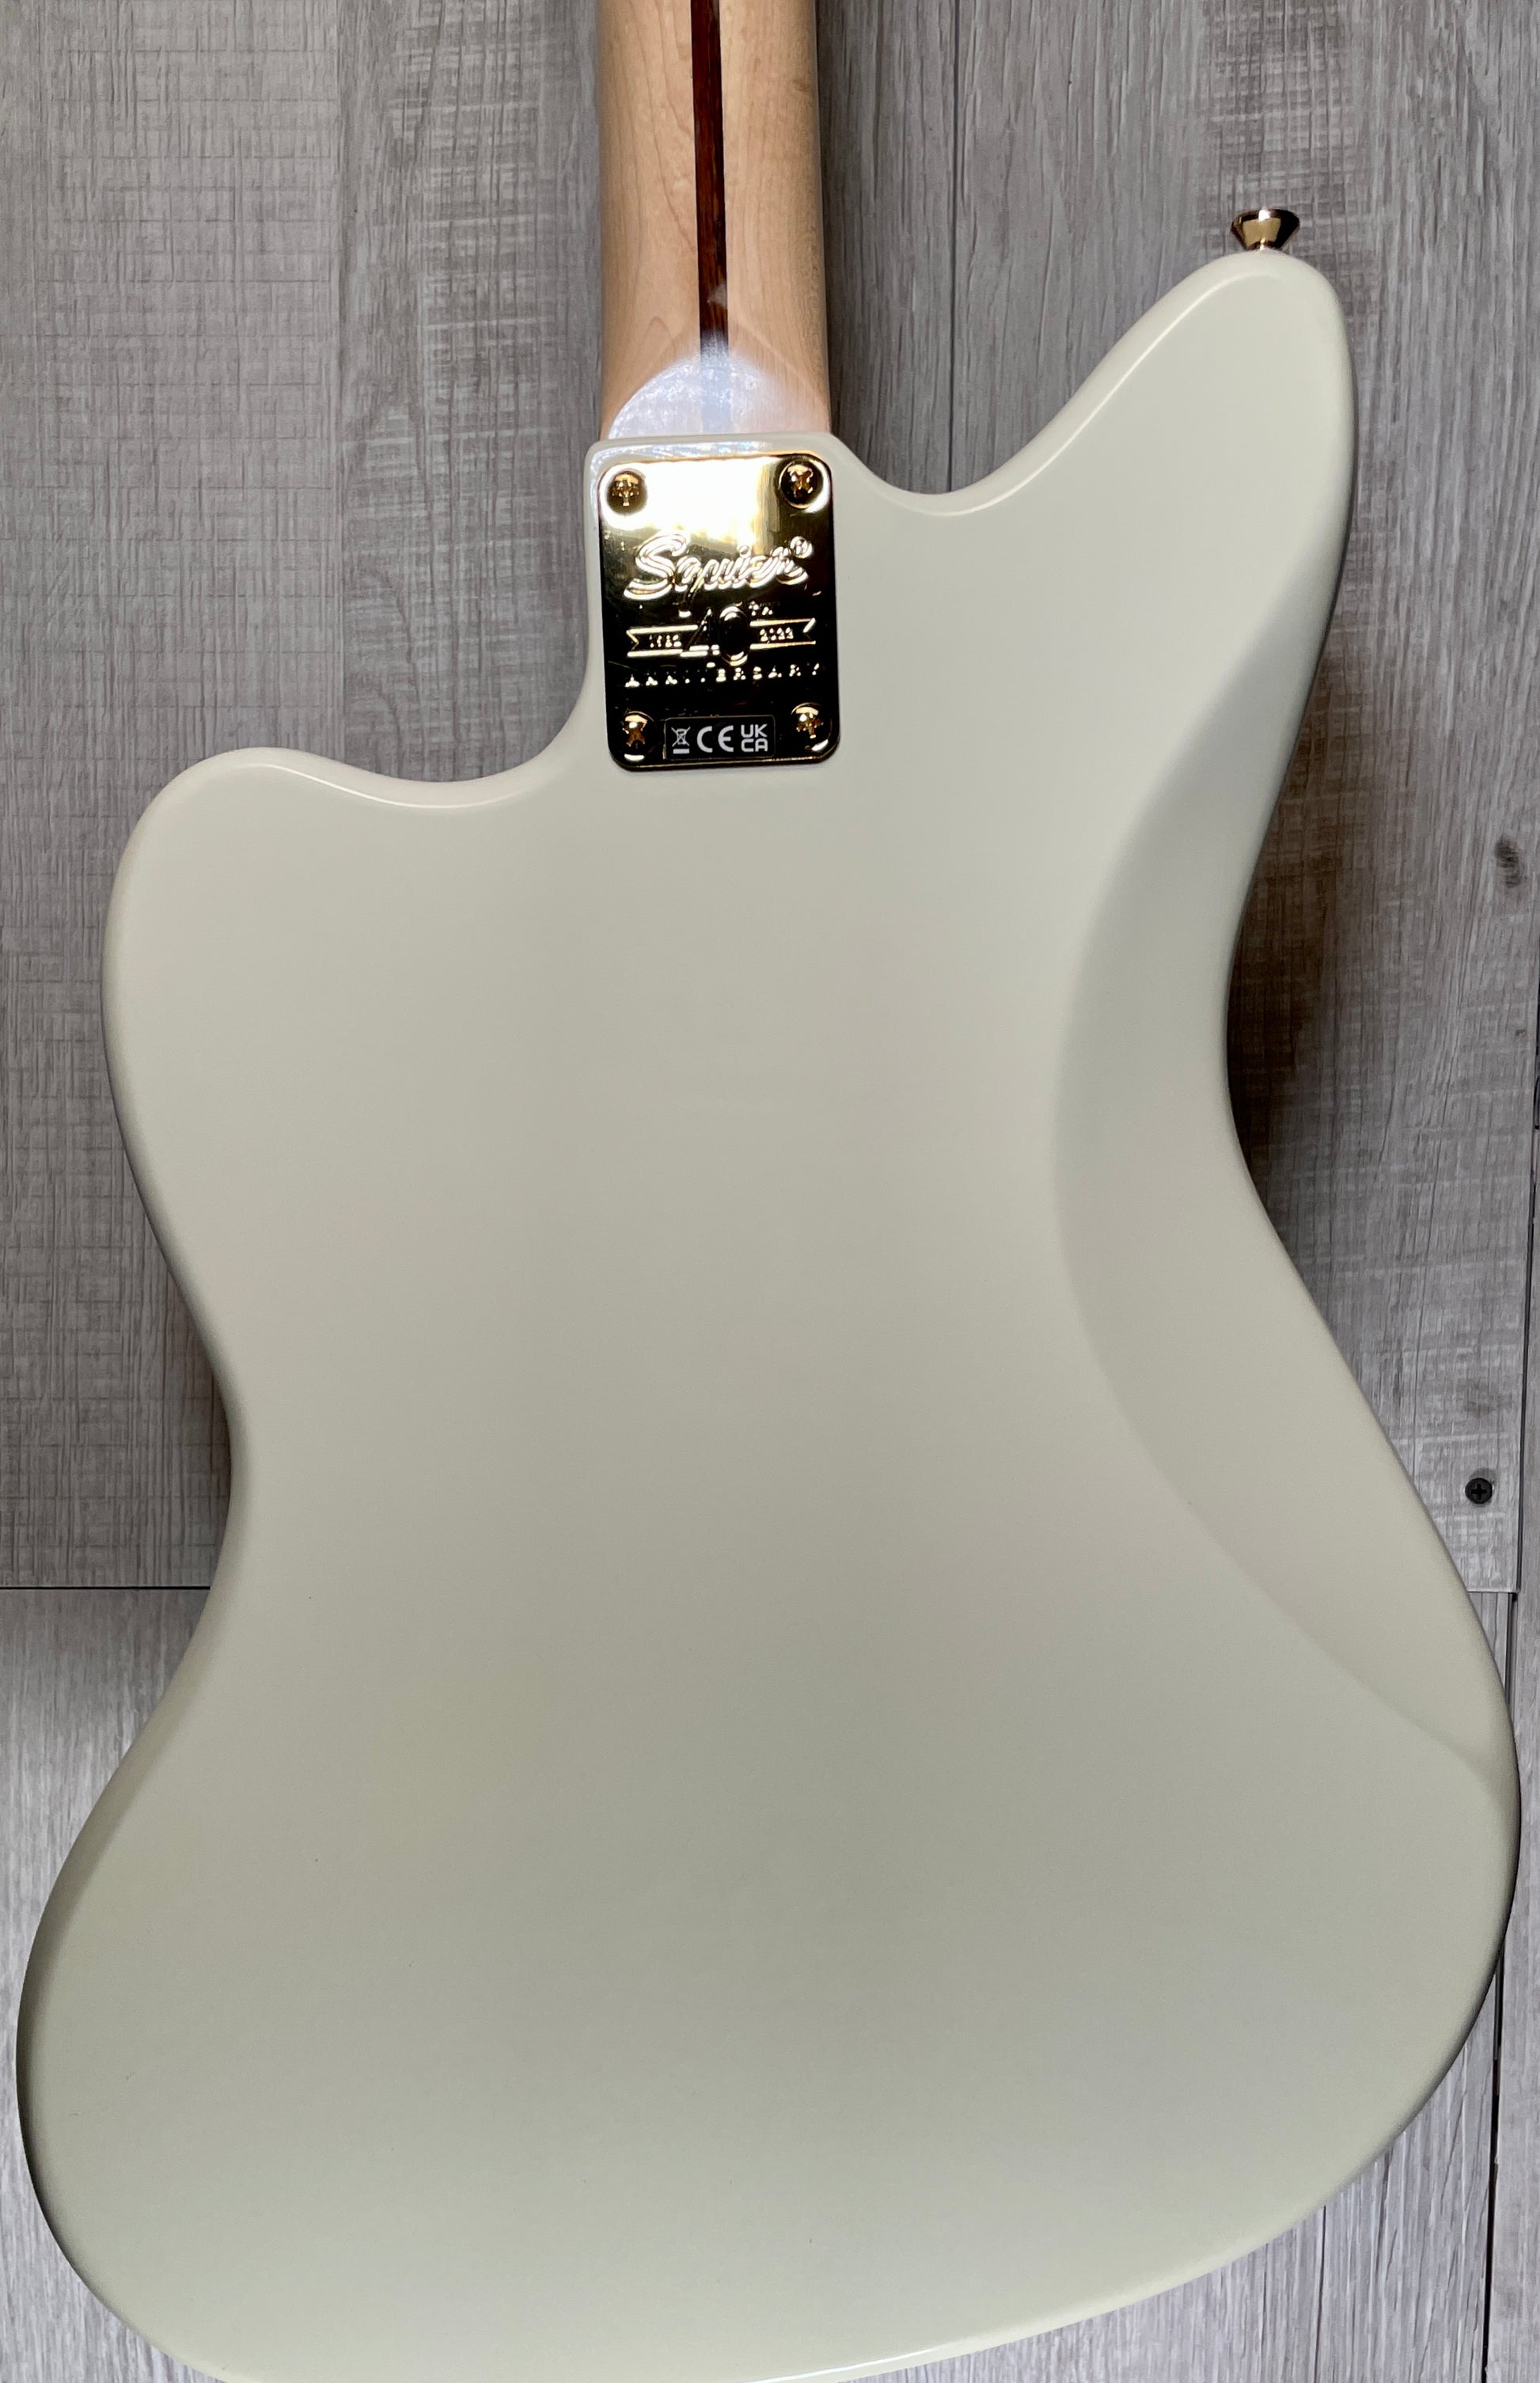 Back view of Used 2022 Squire 40th Anniversary Jazzmaster Gold Edition Olympic White